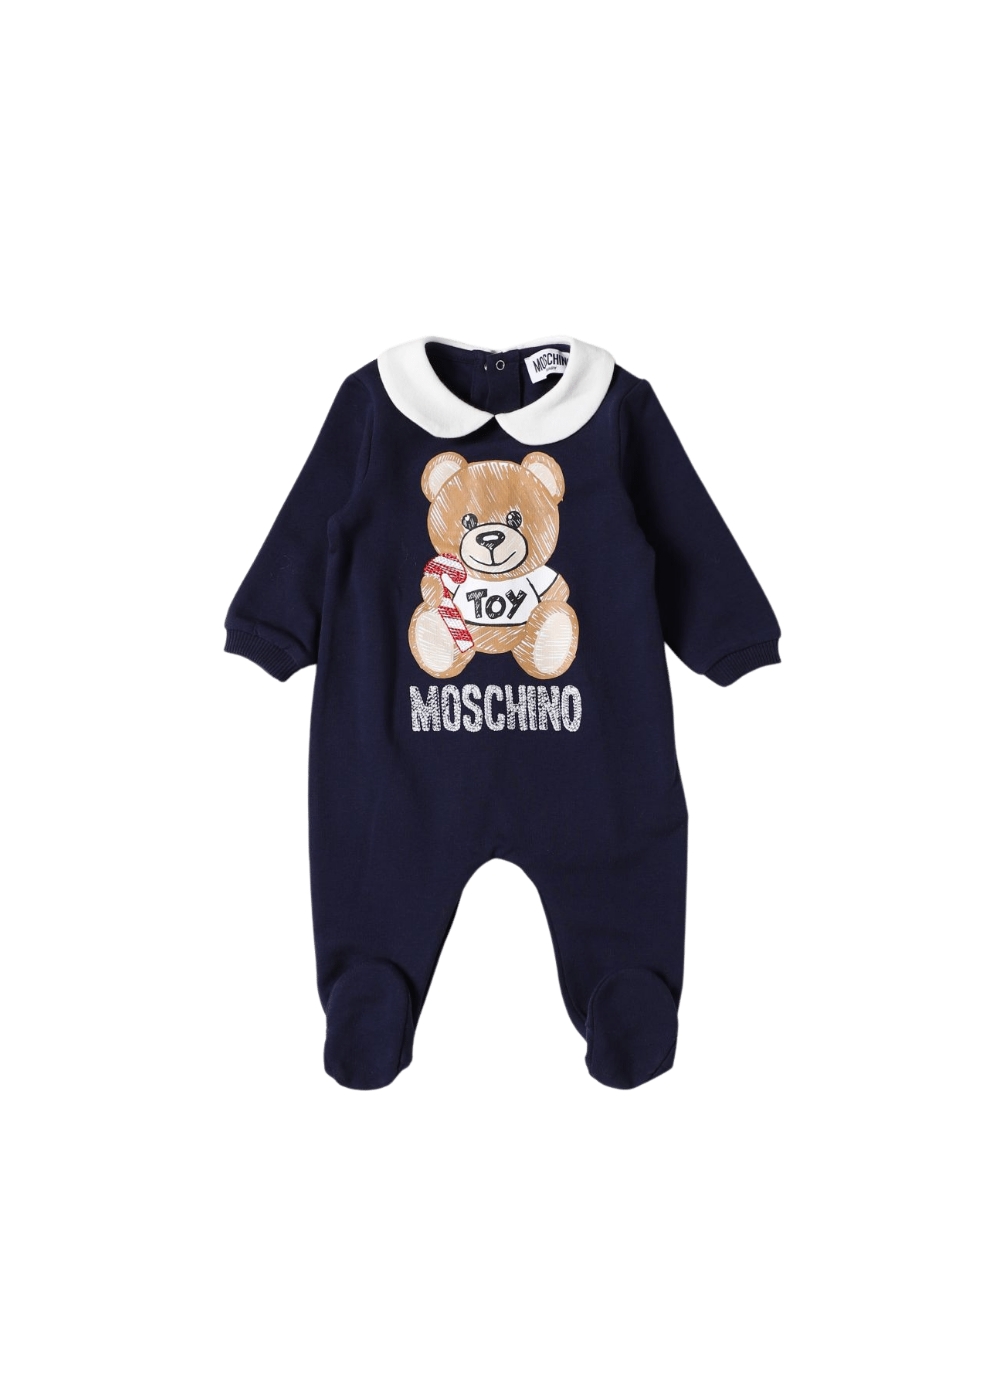 Featured image for “Moschino Tutina”